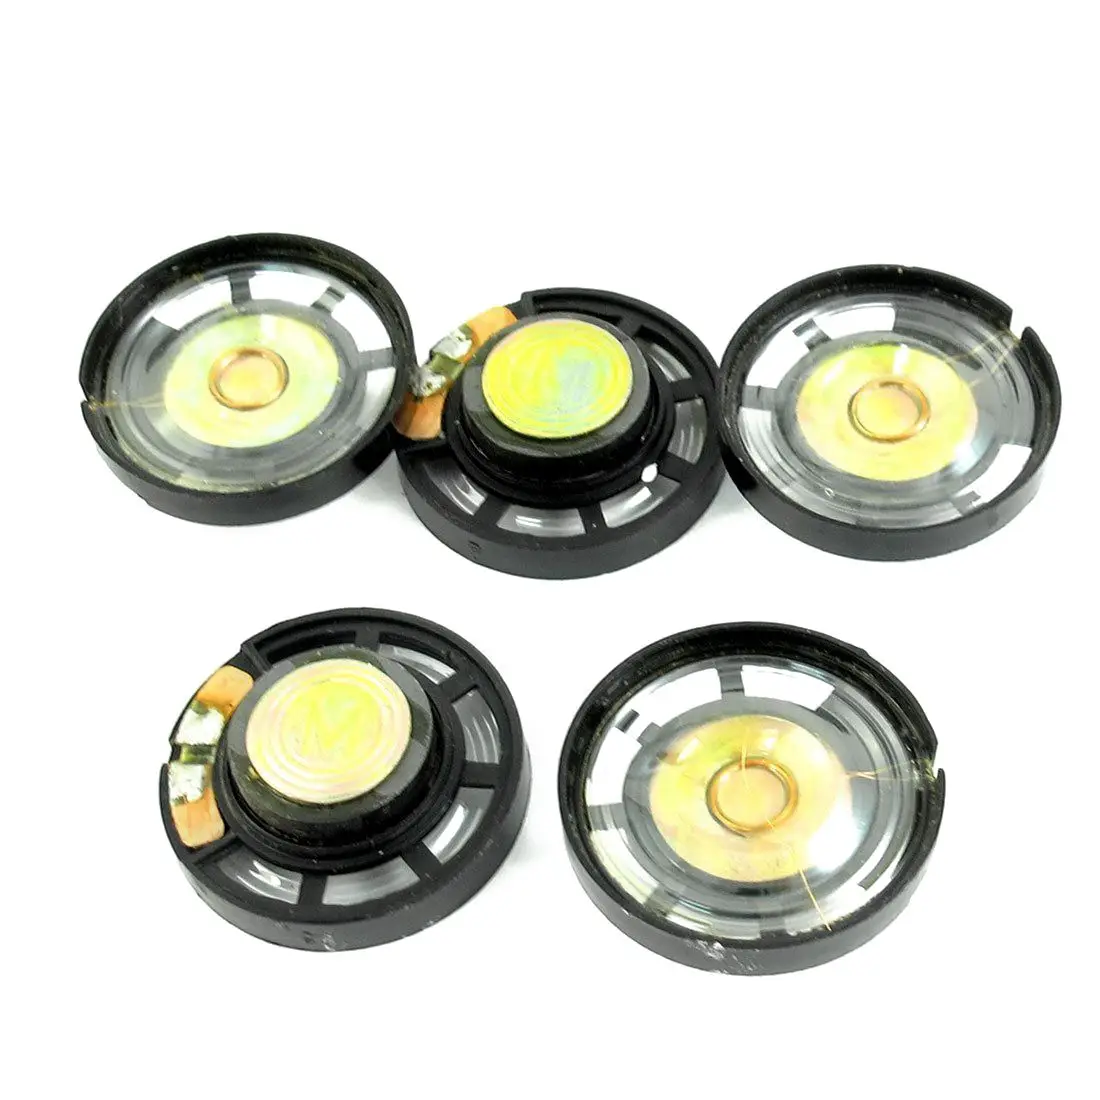 

5 pieces 8 Ohm 0.25 W 29 mm magnetic closure speaker for electric toy